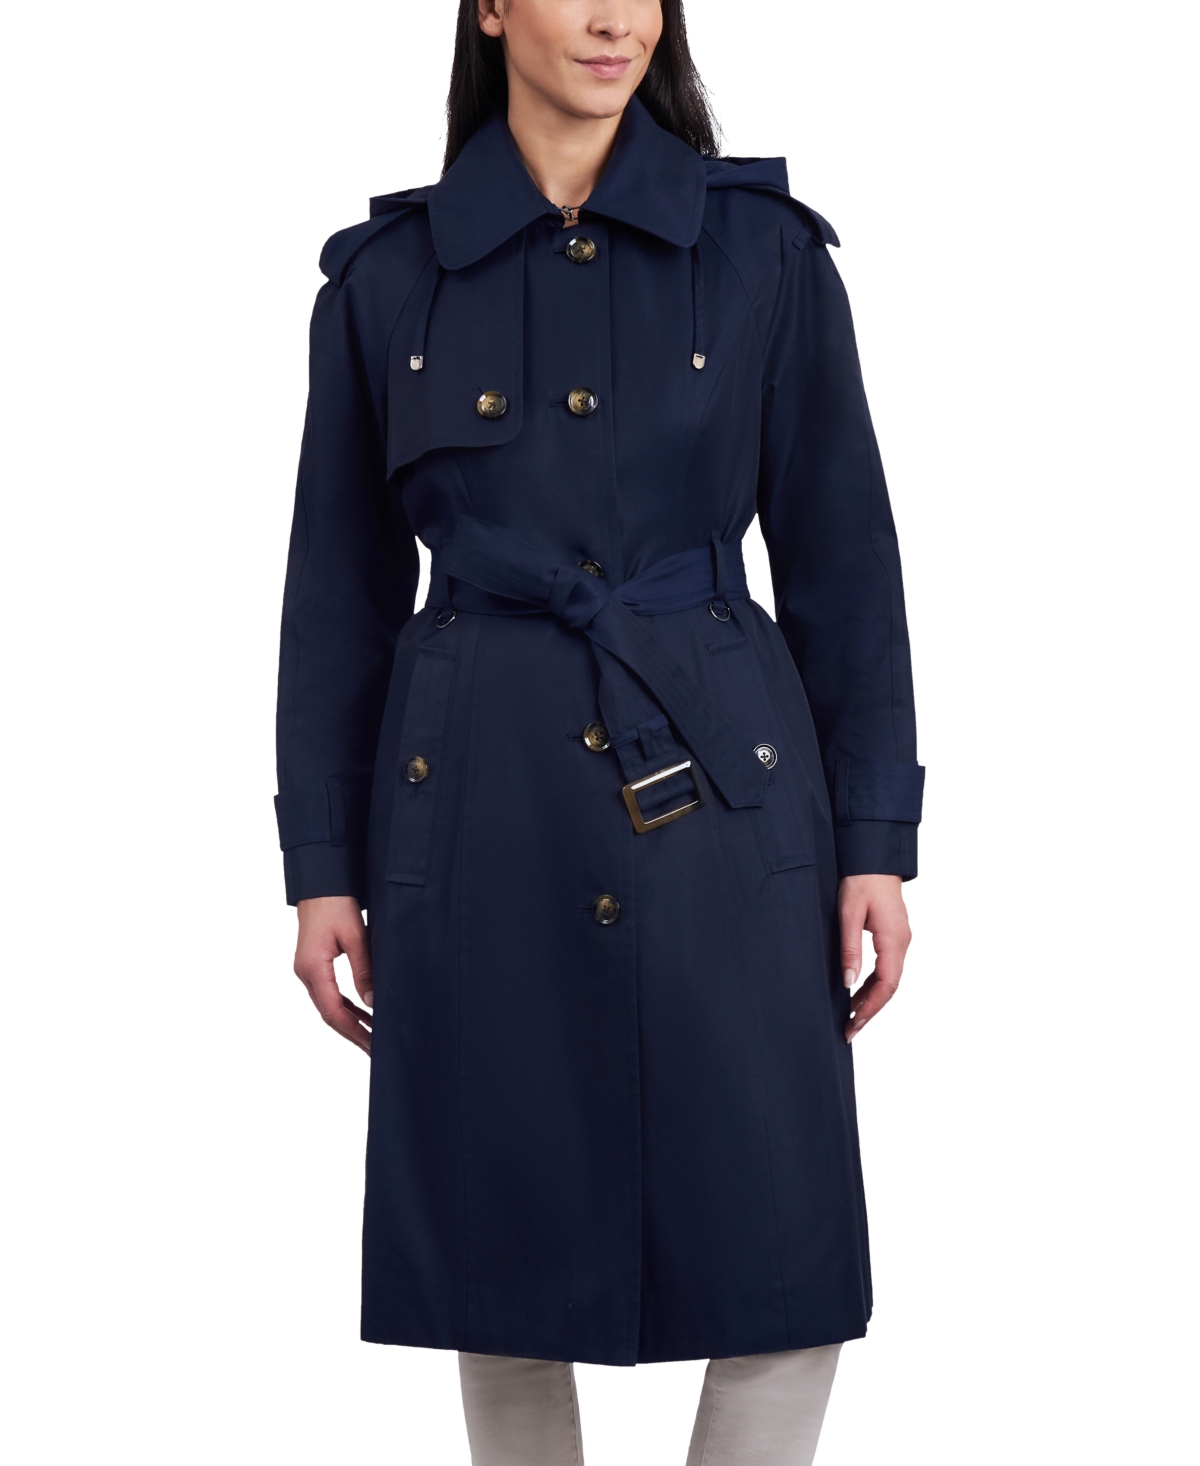 Women's Petite Single-Breasted Hooded Belted Trench Coat - Cloudy